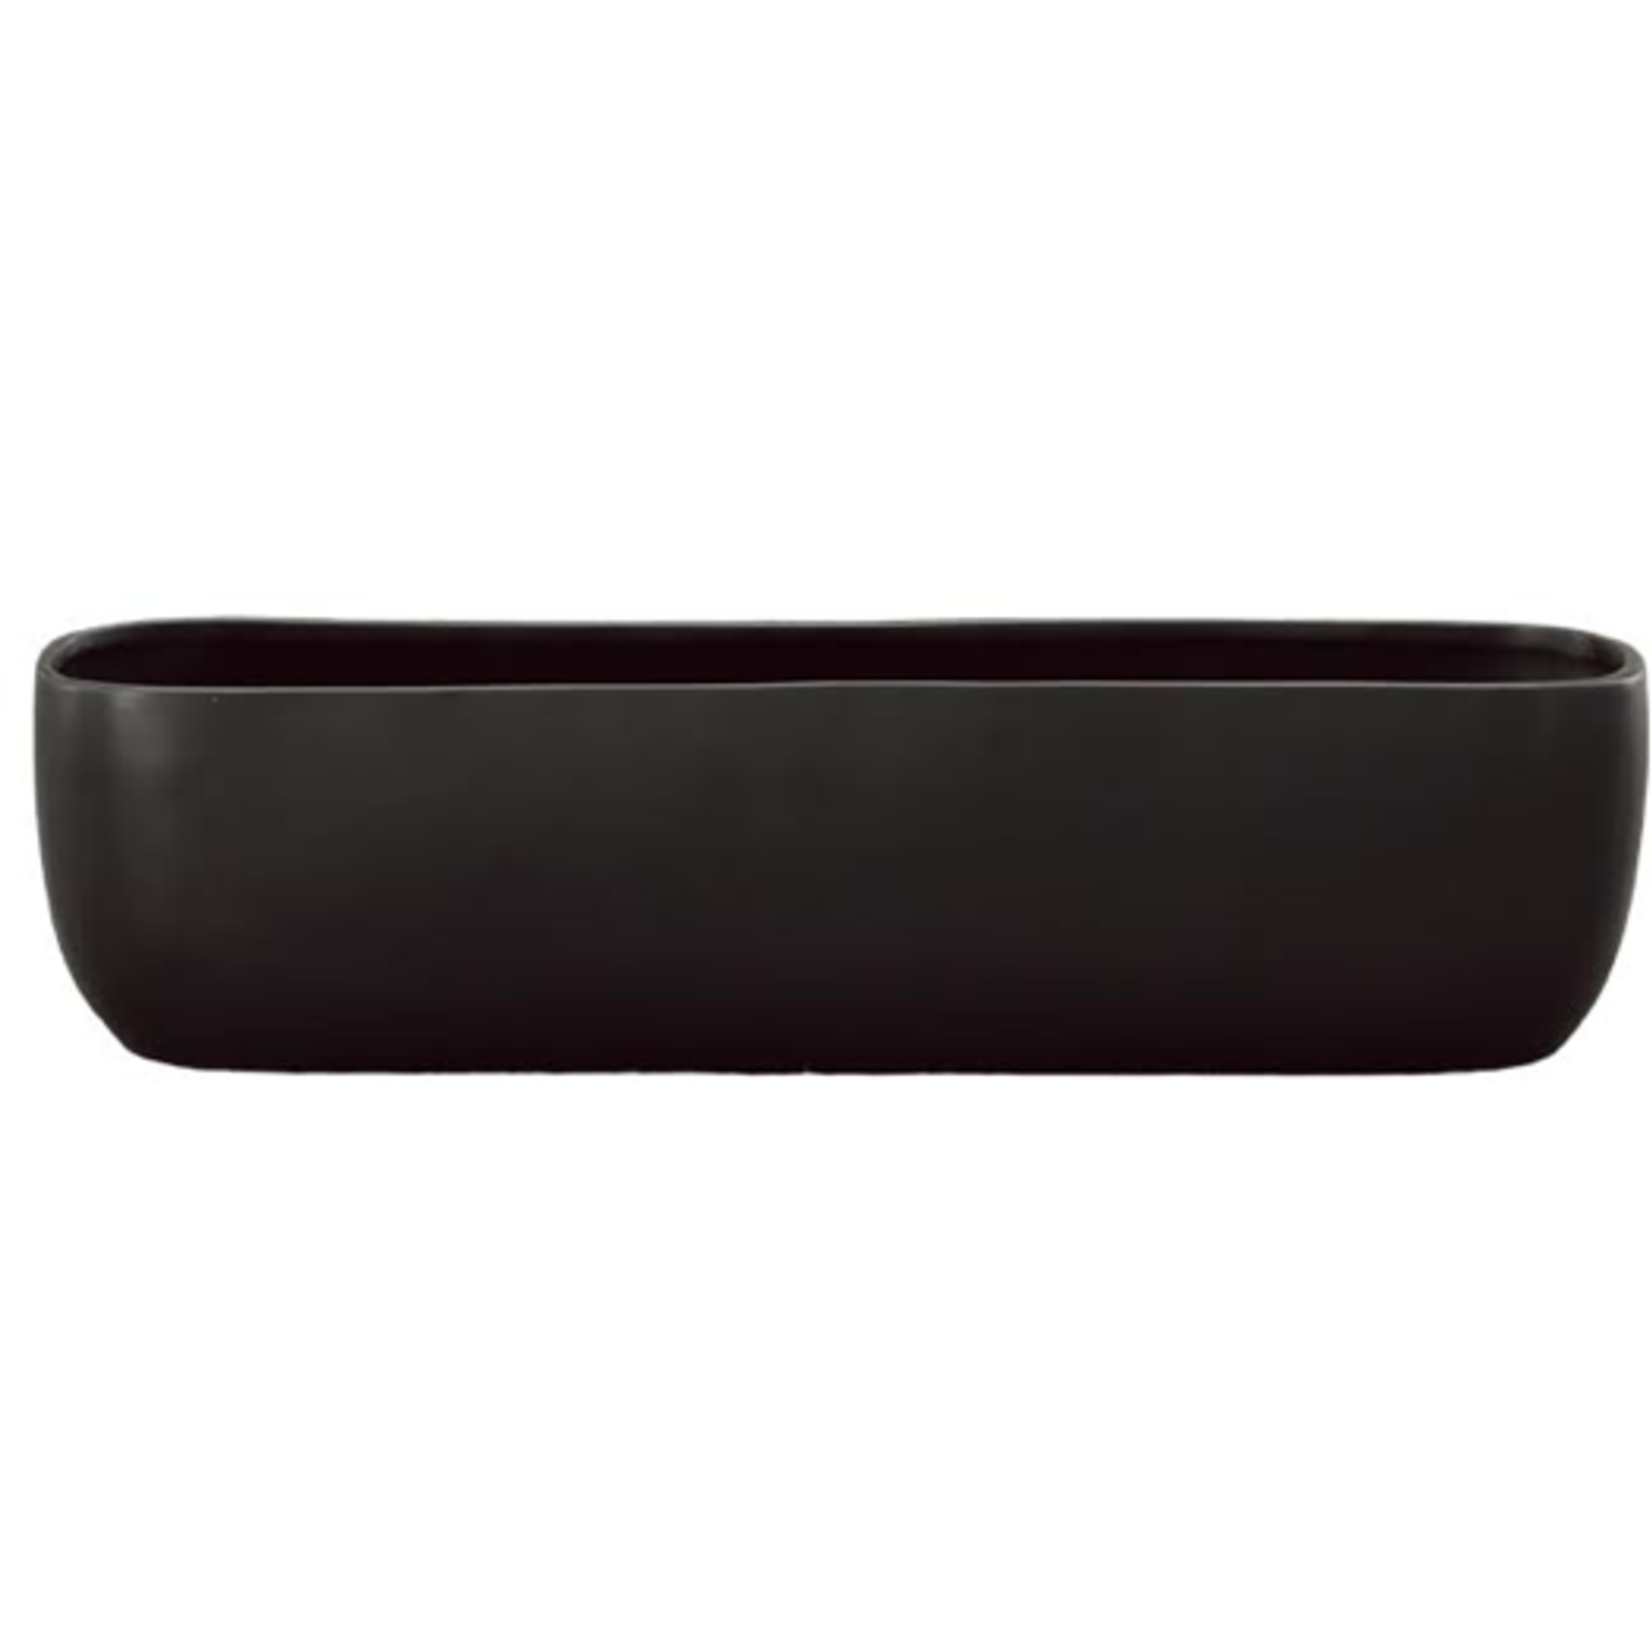 6”H X 24”L BLACK EXTRA LONG AND LOW CERAMIC WITH OVAL CORNERS